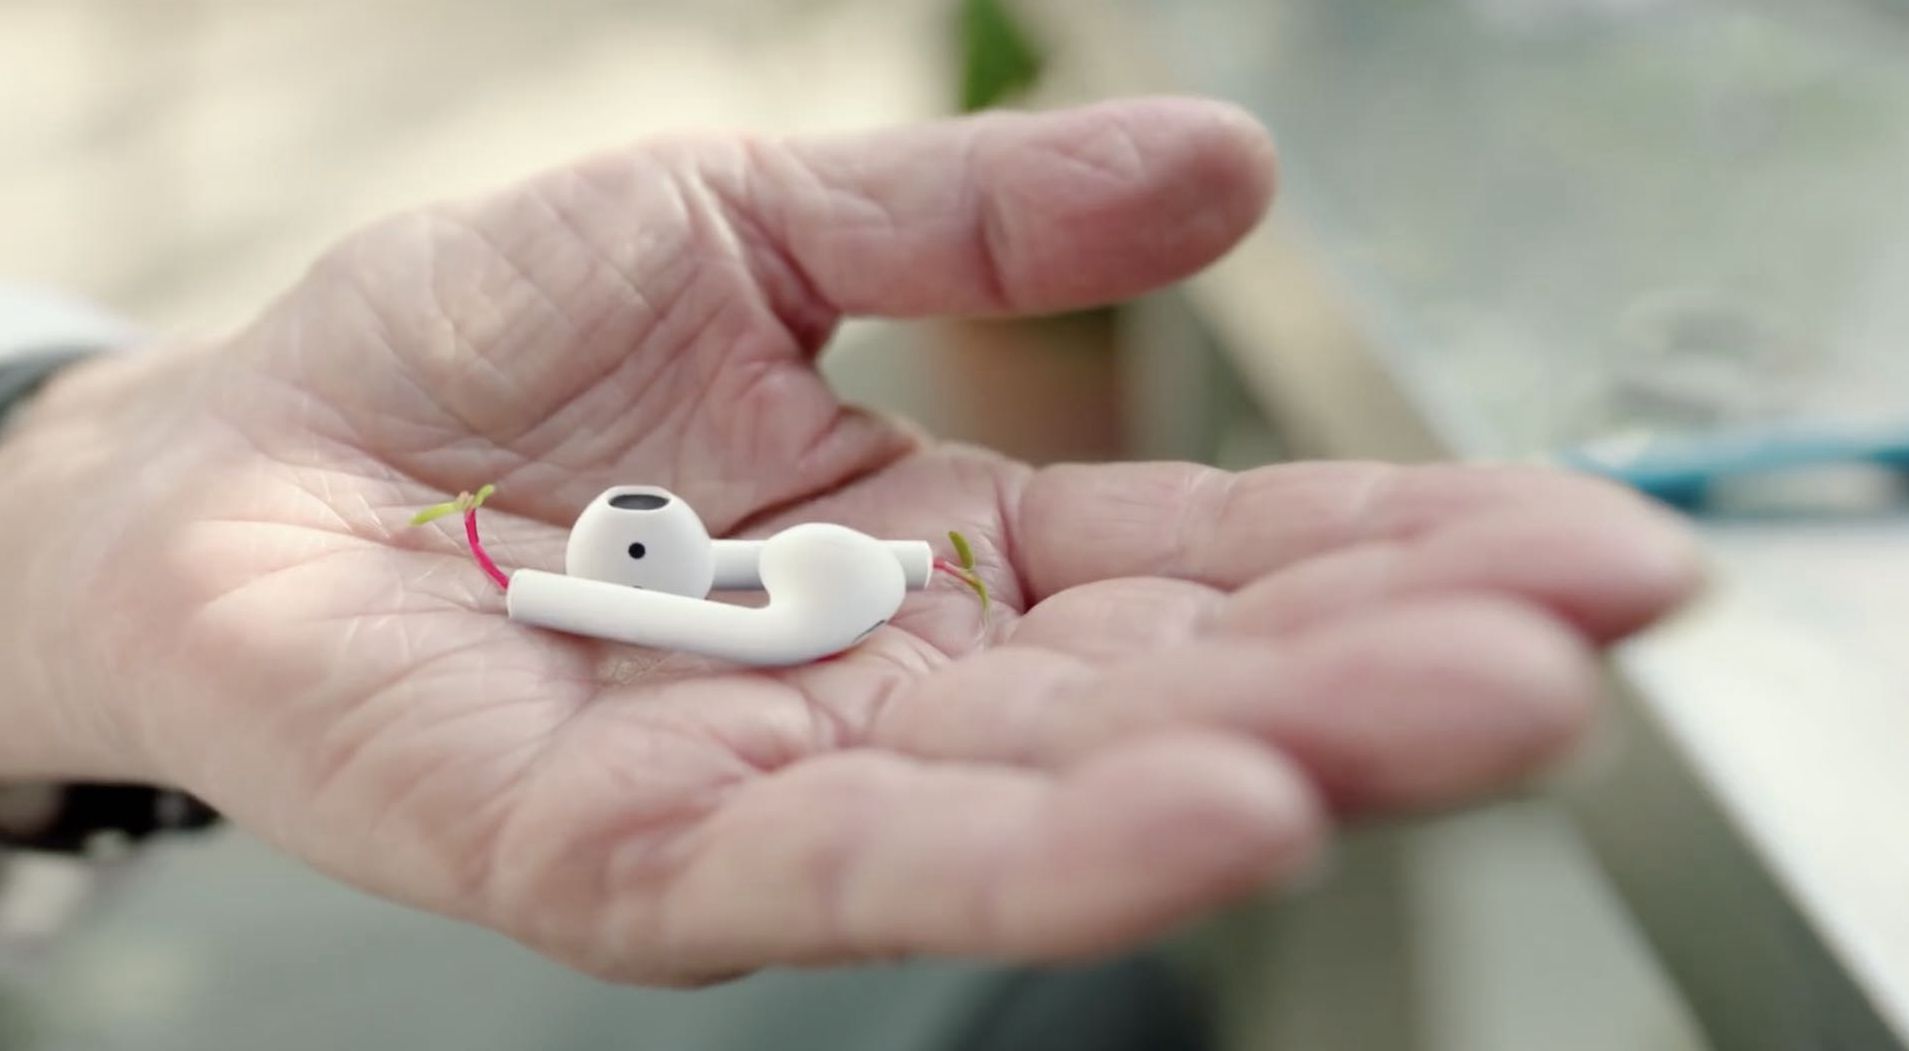 Kuo: Two New AirPods Models Launching in 2019 & 2020, One with an All-New Design